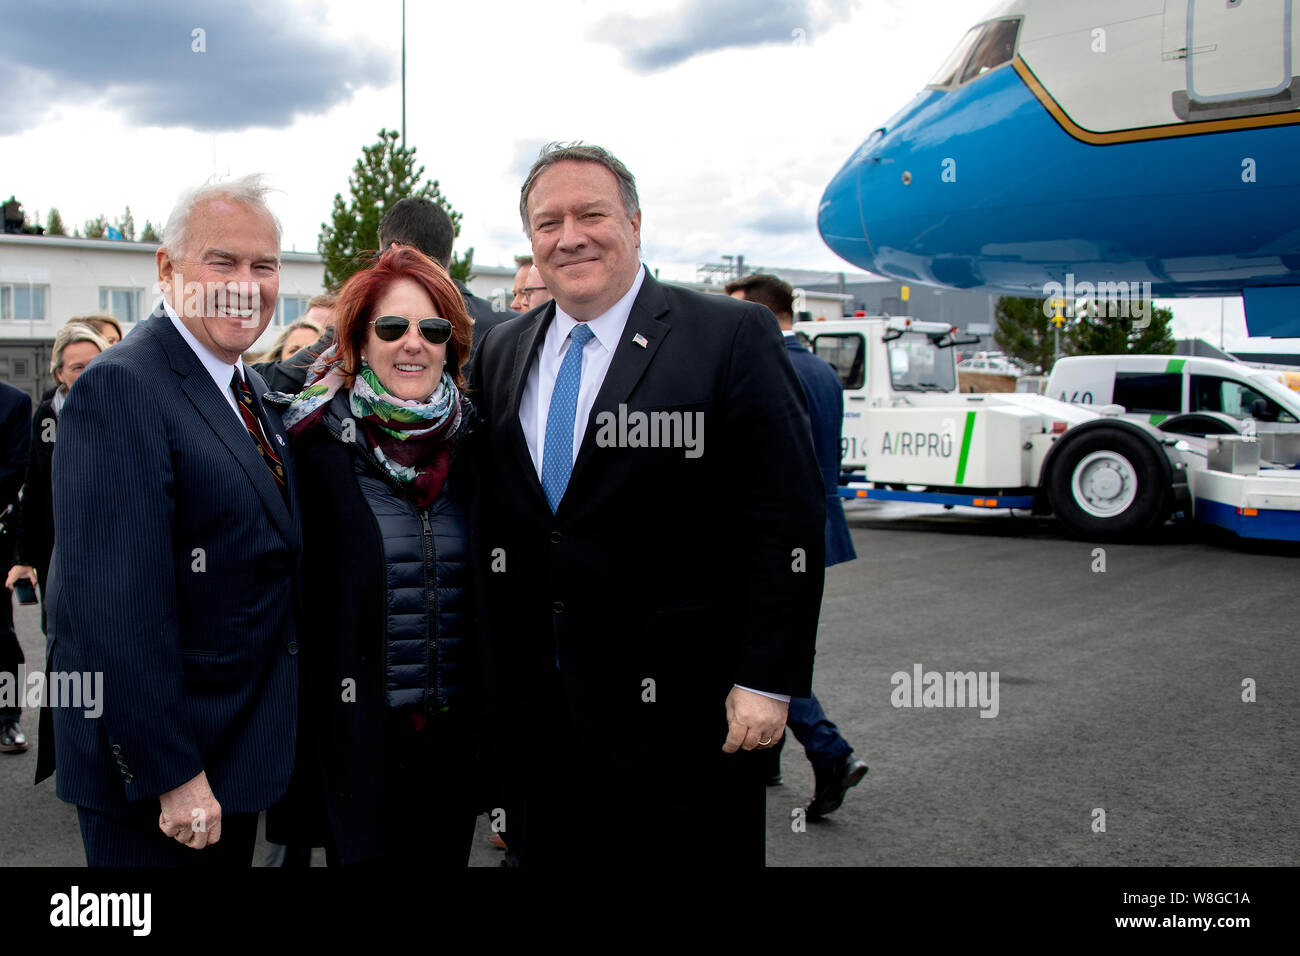 U.S. Secretary of State Michael R. Pompeo with U.S. Ambassador to Finland Robert Pence and Mrs. Suzy Pence prior to departing Rovaniemi Airport in Rov Stock Photo